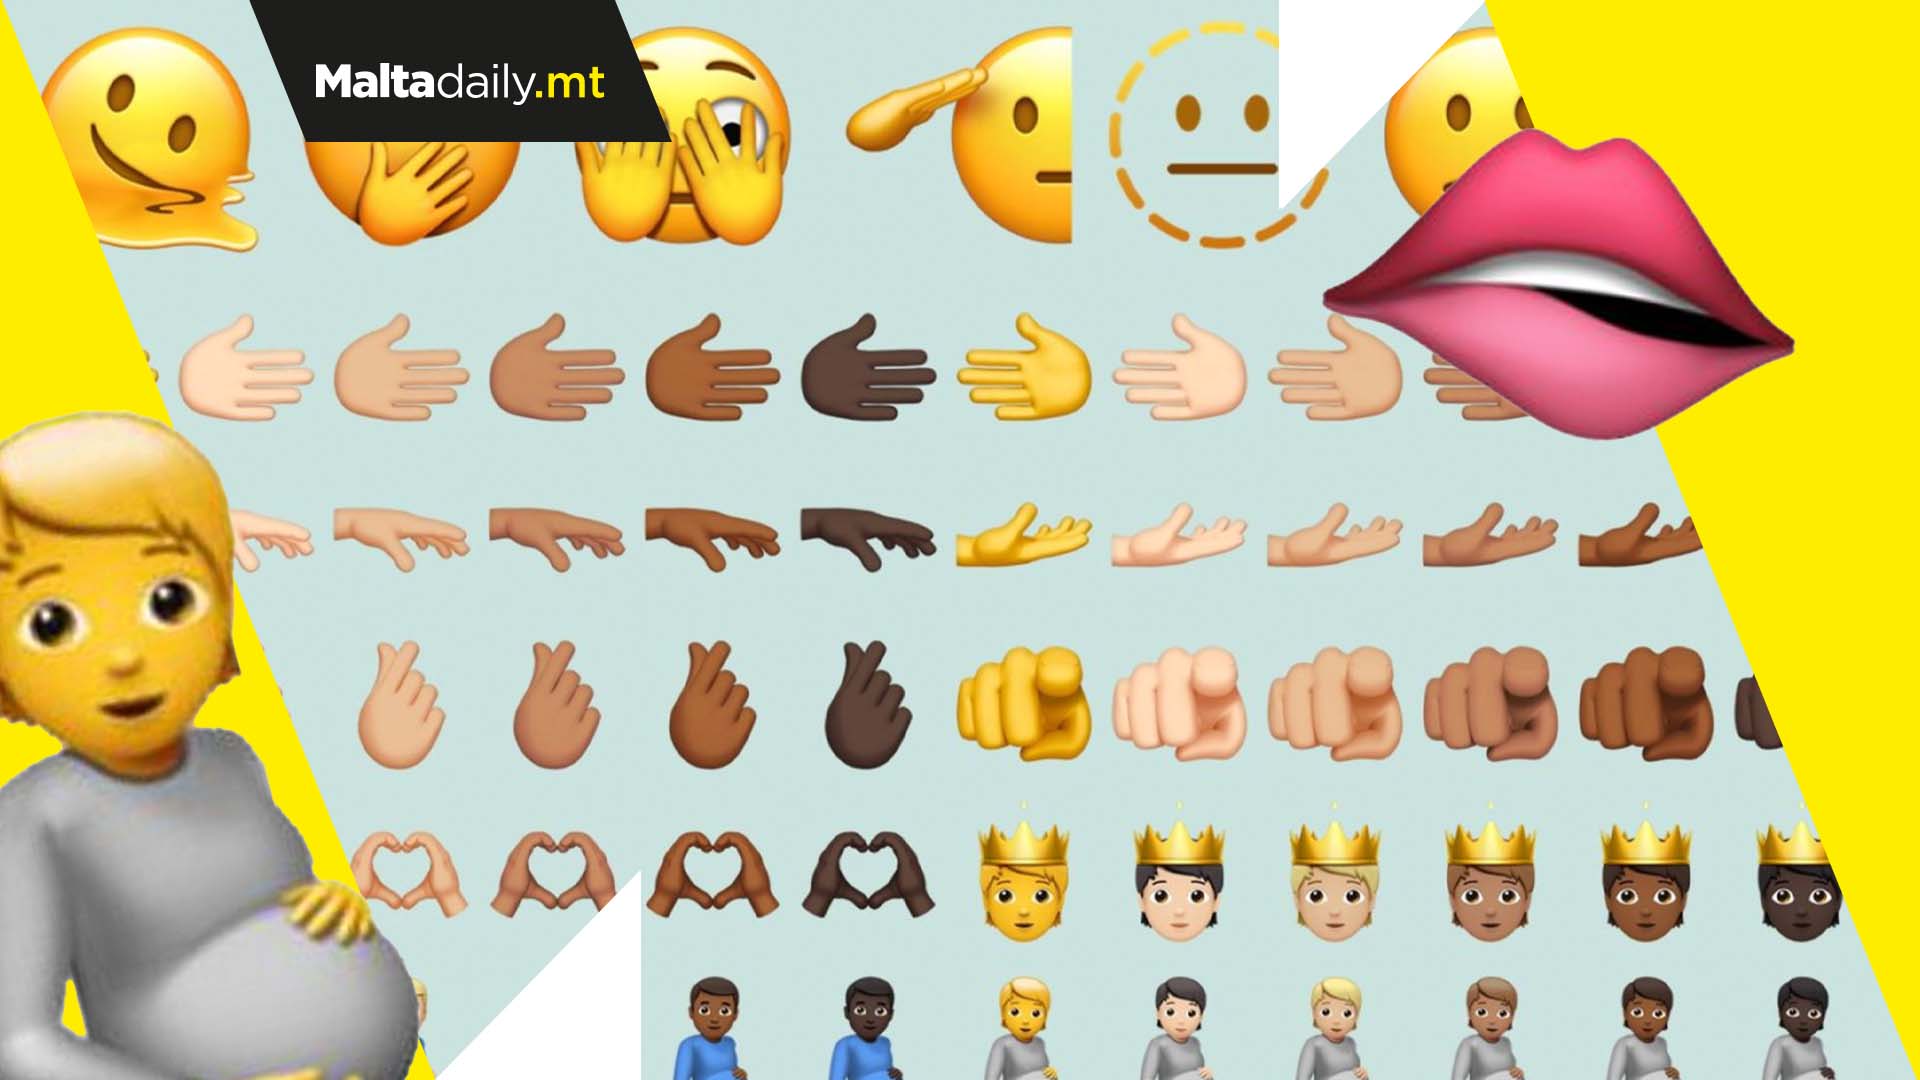 Melting face among 123 new and inclusive emojis added to iOS 15.4